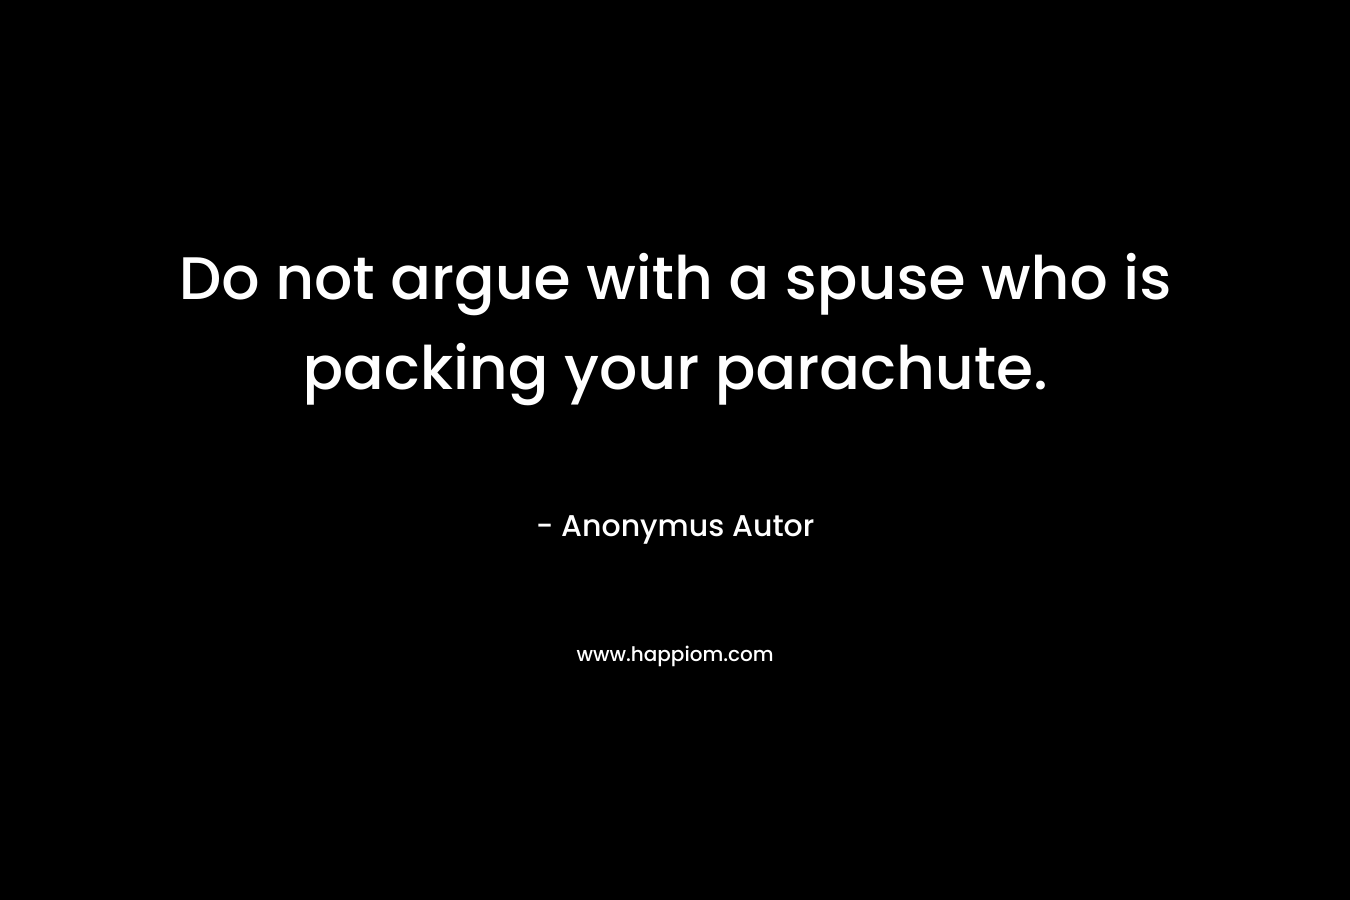 Do not argue with a spuse who is packing your parachute. – Anonymus Autor